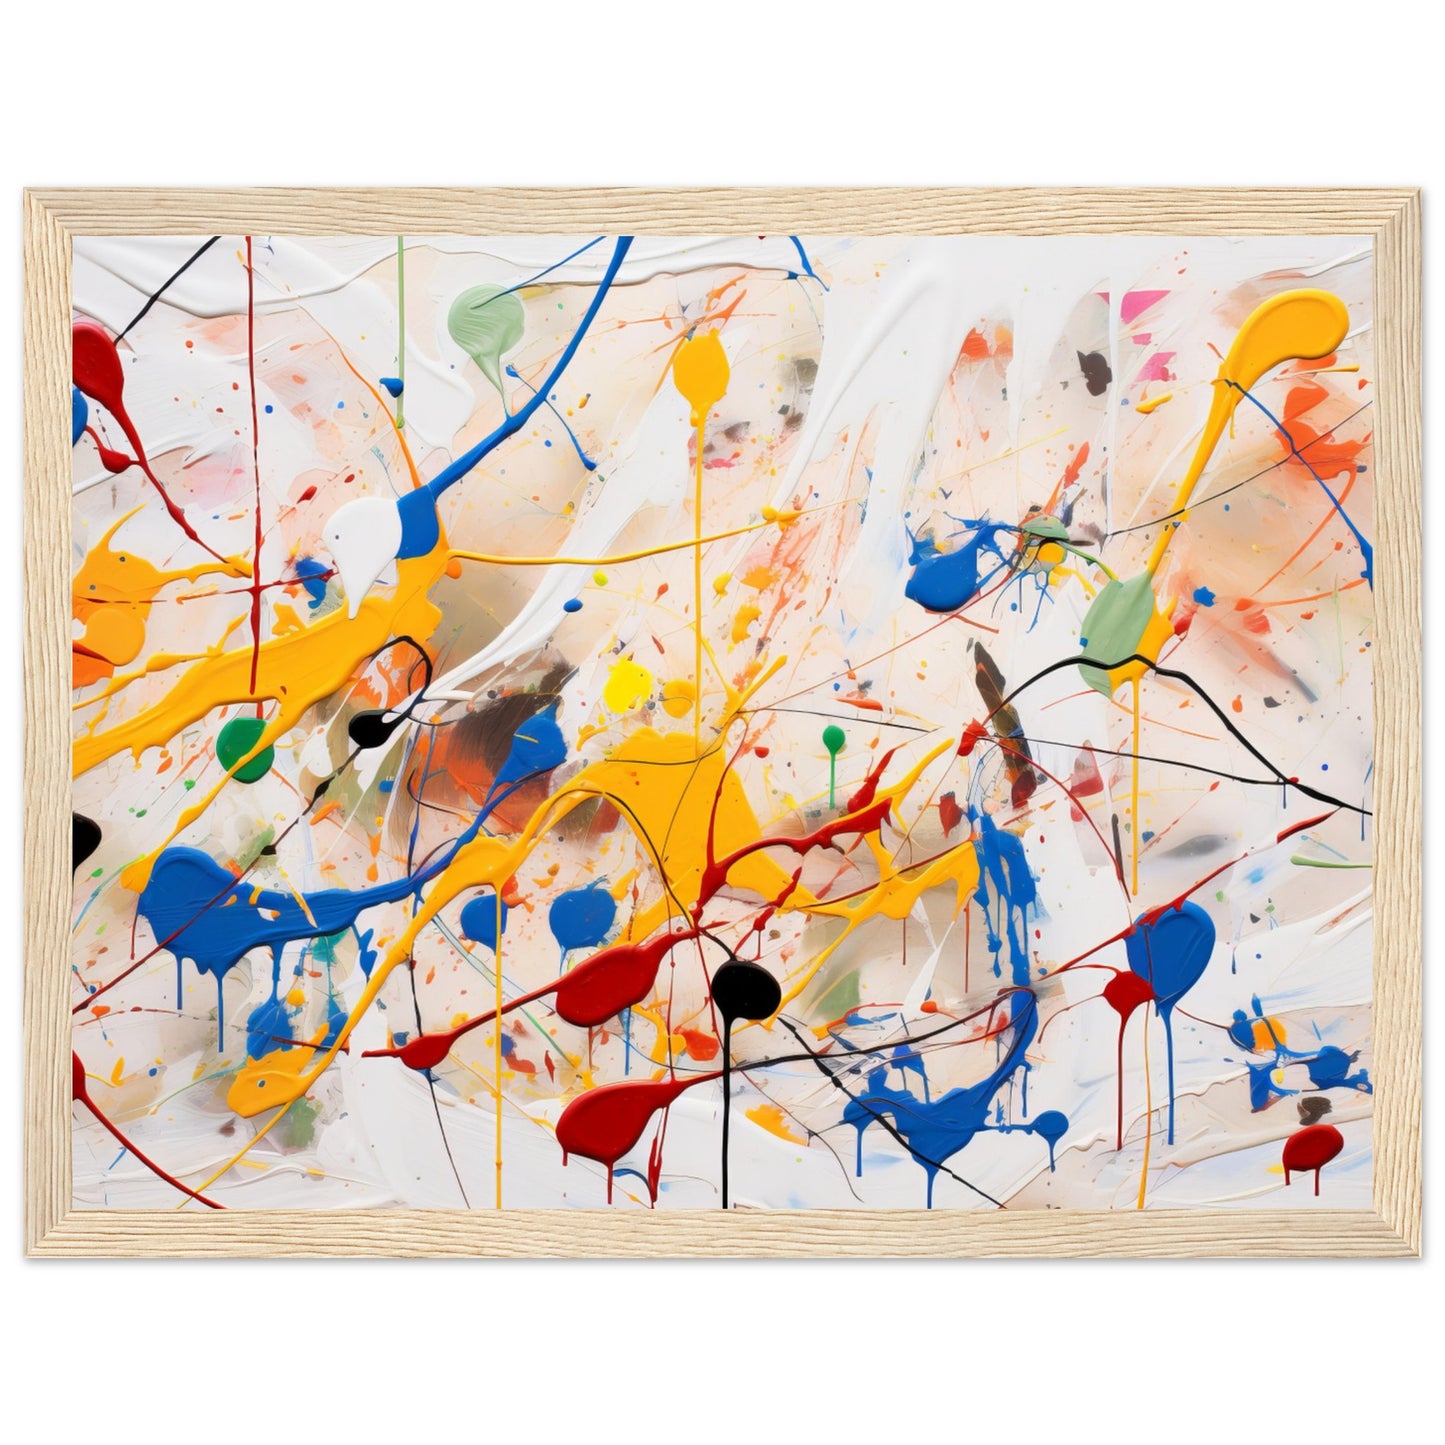 Dynamic Abstract Art #08 - Pollock Inspired No frame 50x70 cm / 20x28"